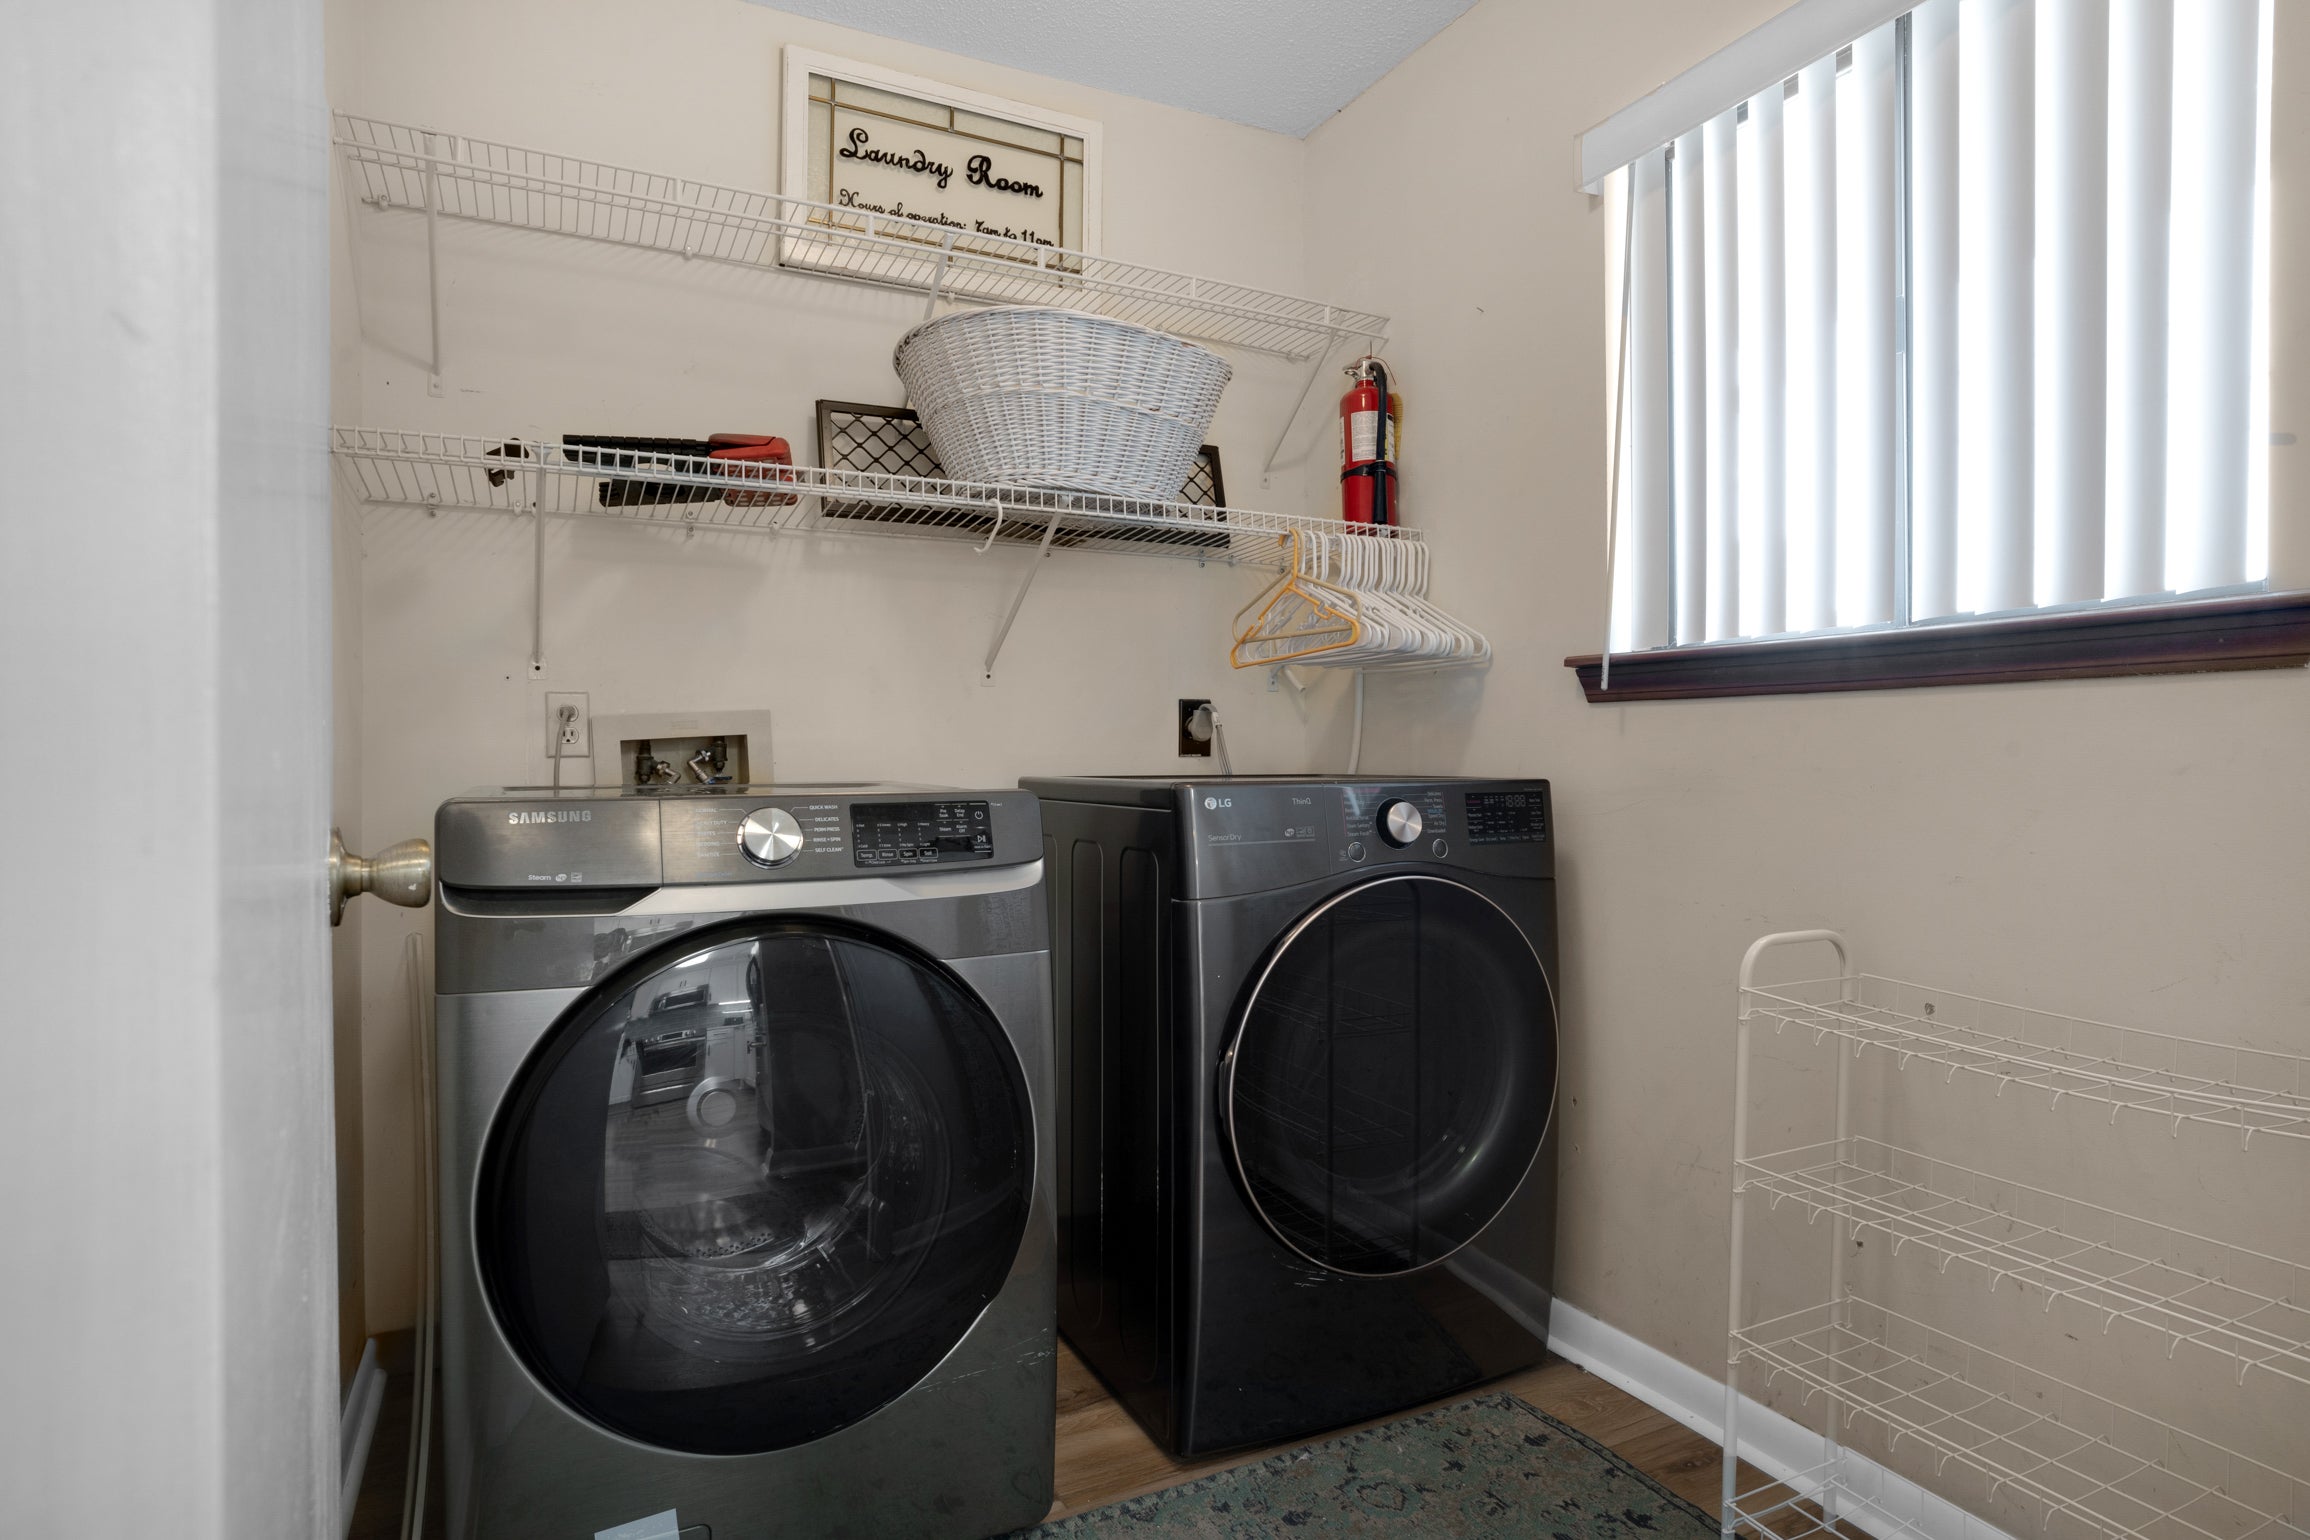 Washer Dryer in Laundry Room